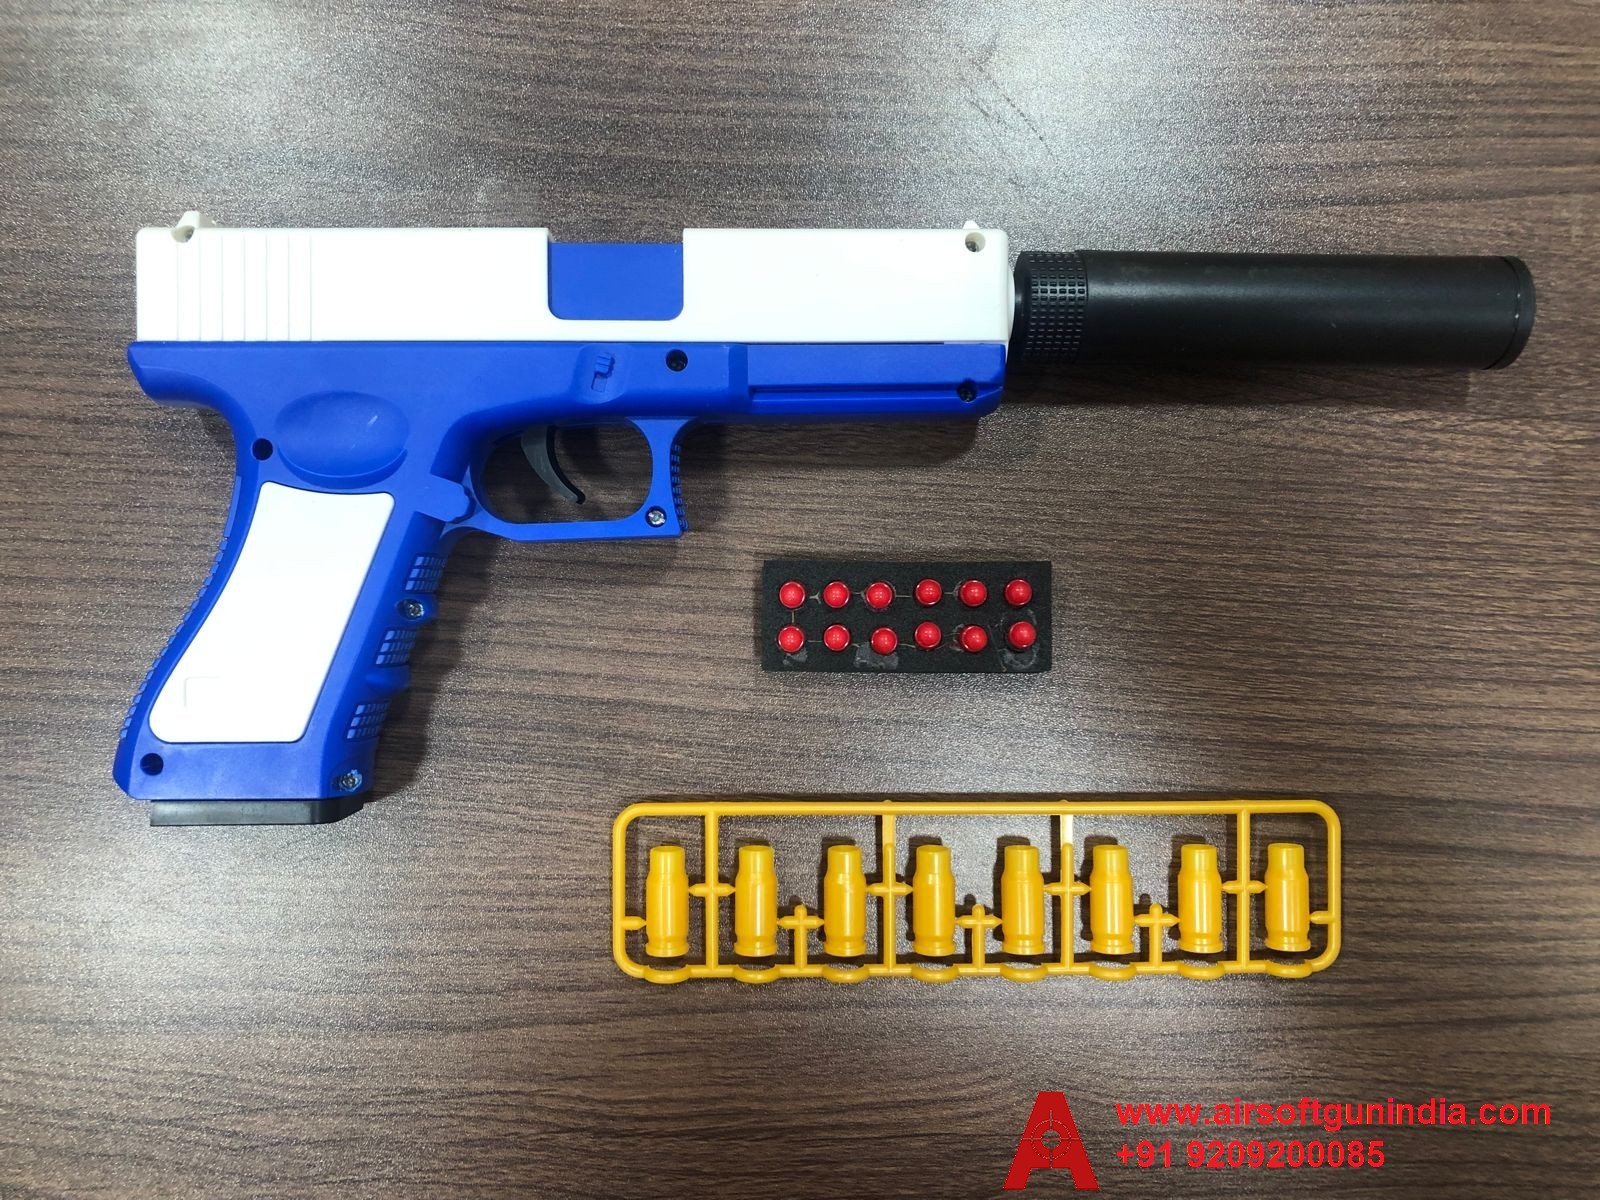 Shell Ejecting Glock 18 Soft Bullet Airsoft Pistol-Blue Shade